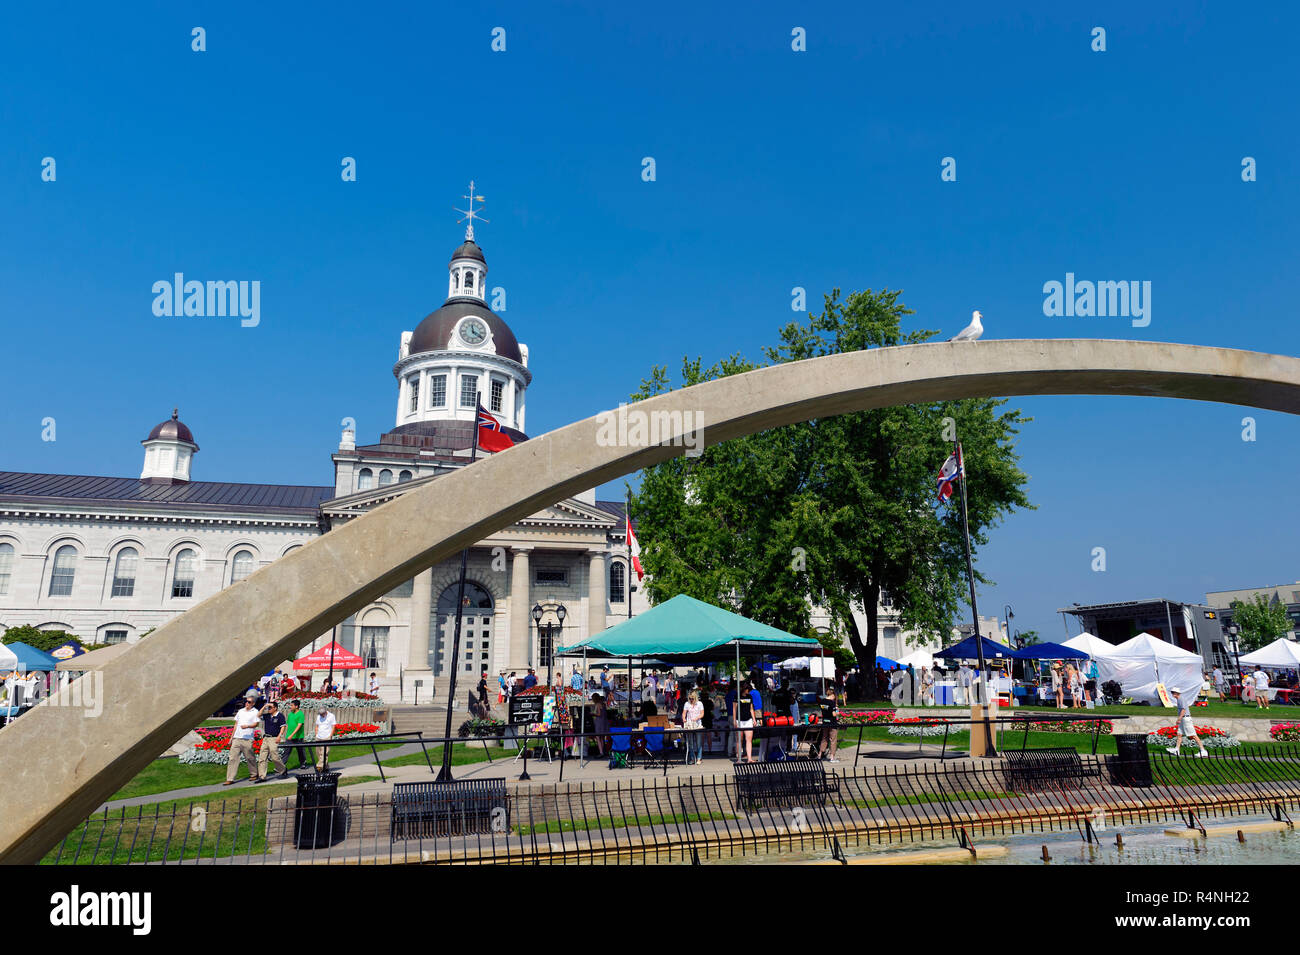 Confederation Park and City Hall, with part of the Confederation Arch in the foreground. Kingston, Ontario, Canada. Stock Photo